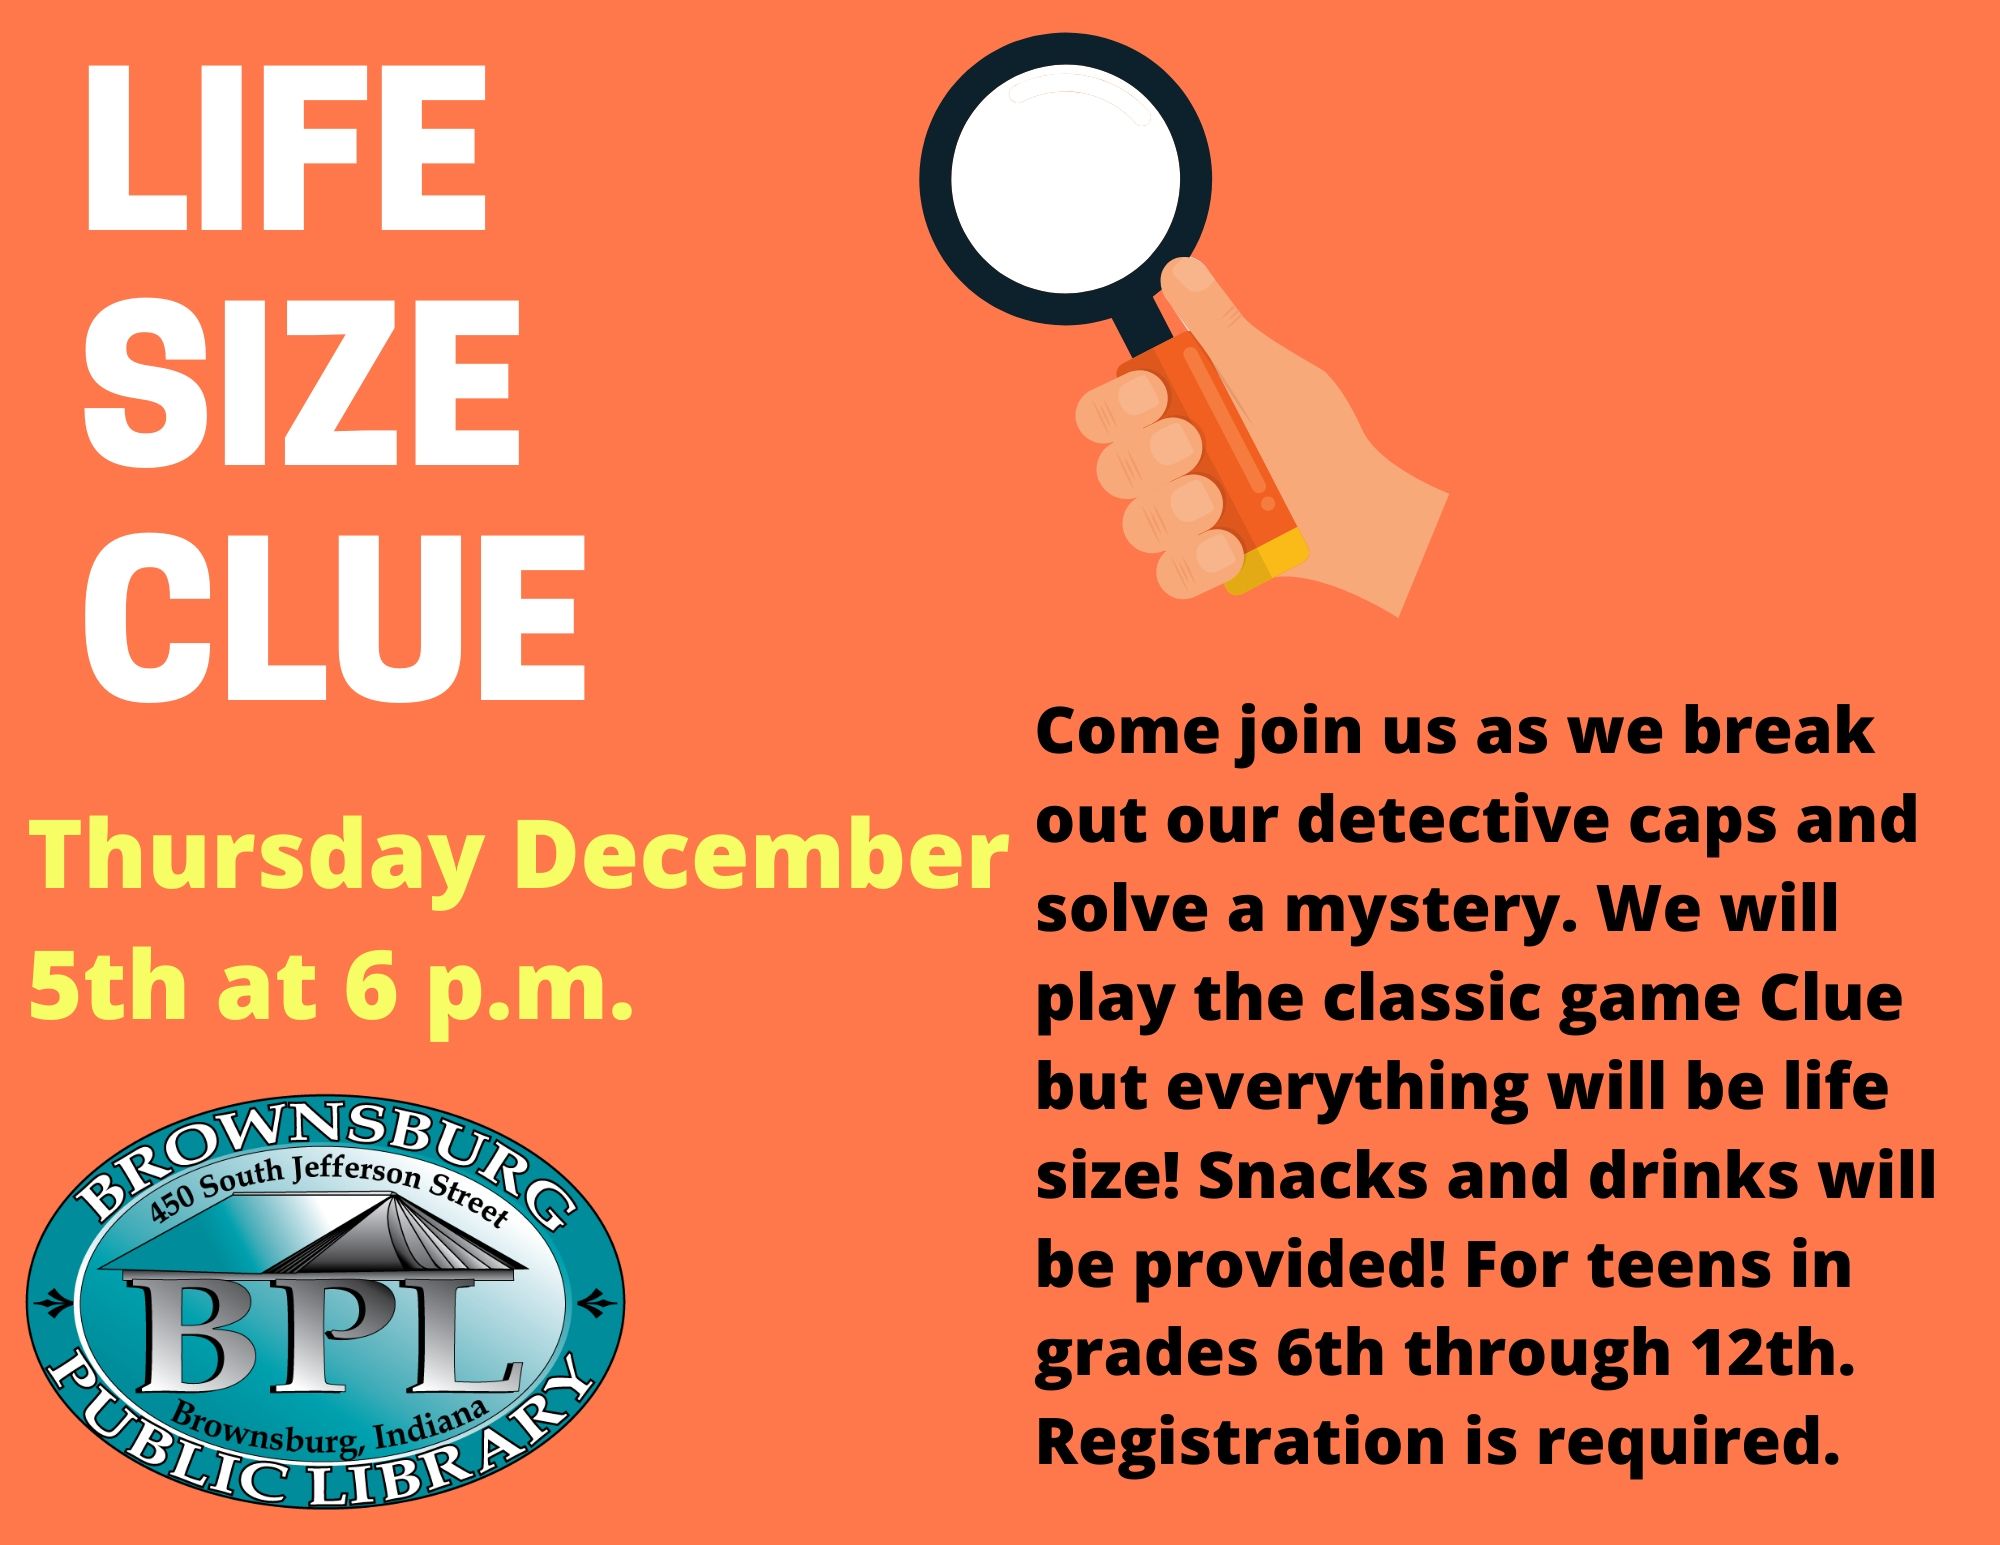 Life Size Clue December 5th at 6 pm